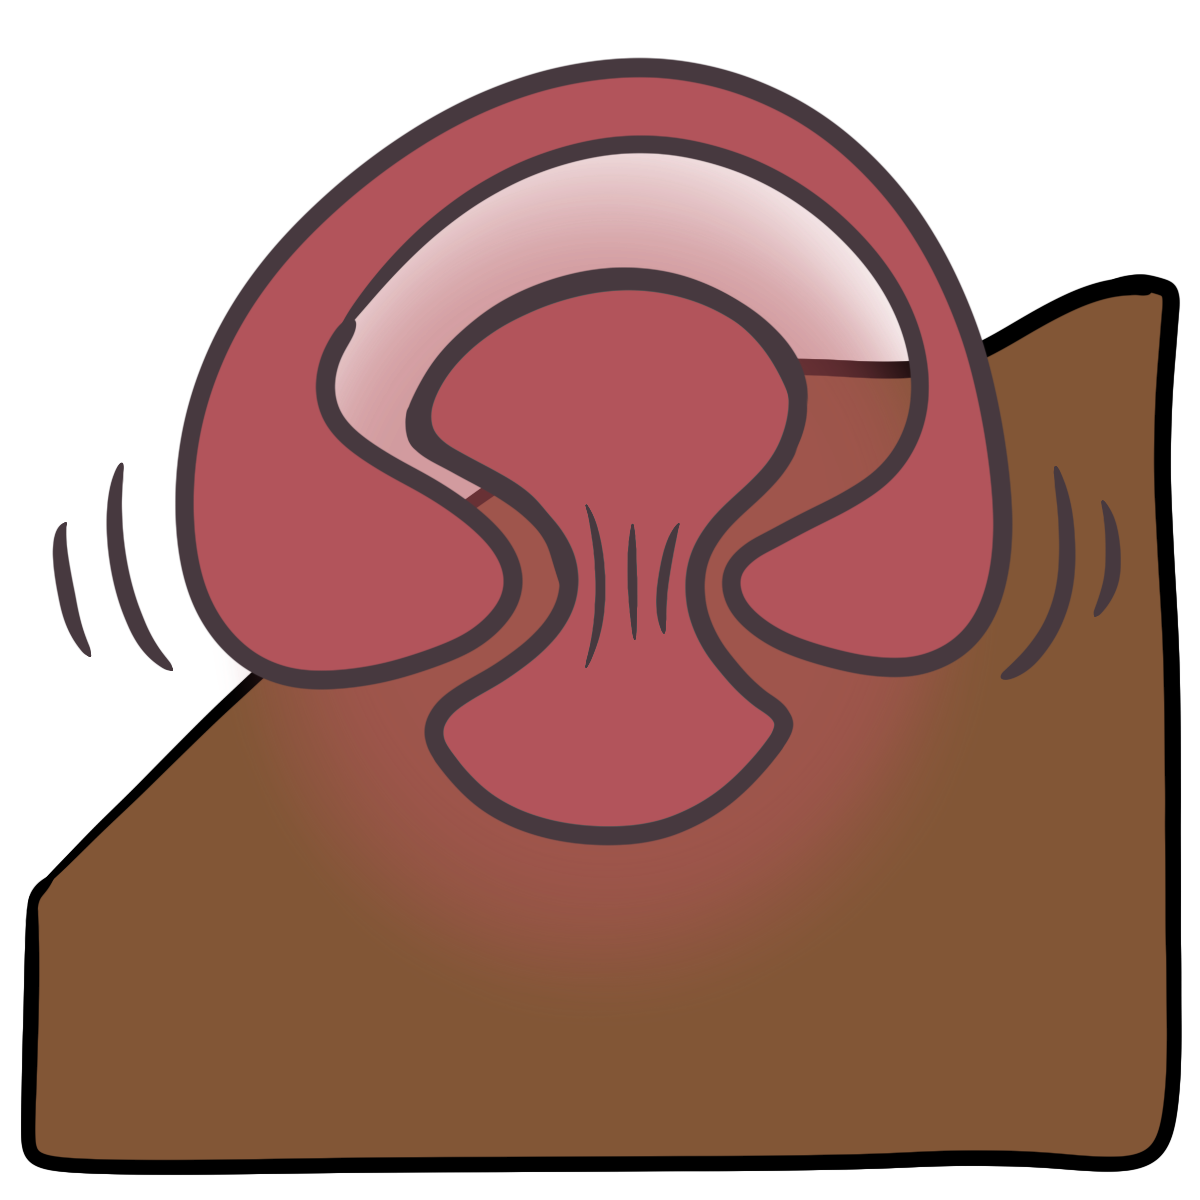 A pink glowing hourglass shape being pinched by a blob arched above it with larger ends pushing on the middle. Curved medium brown skin fills the bottom half of the background.